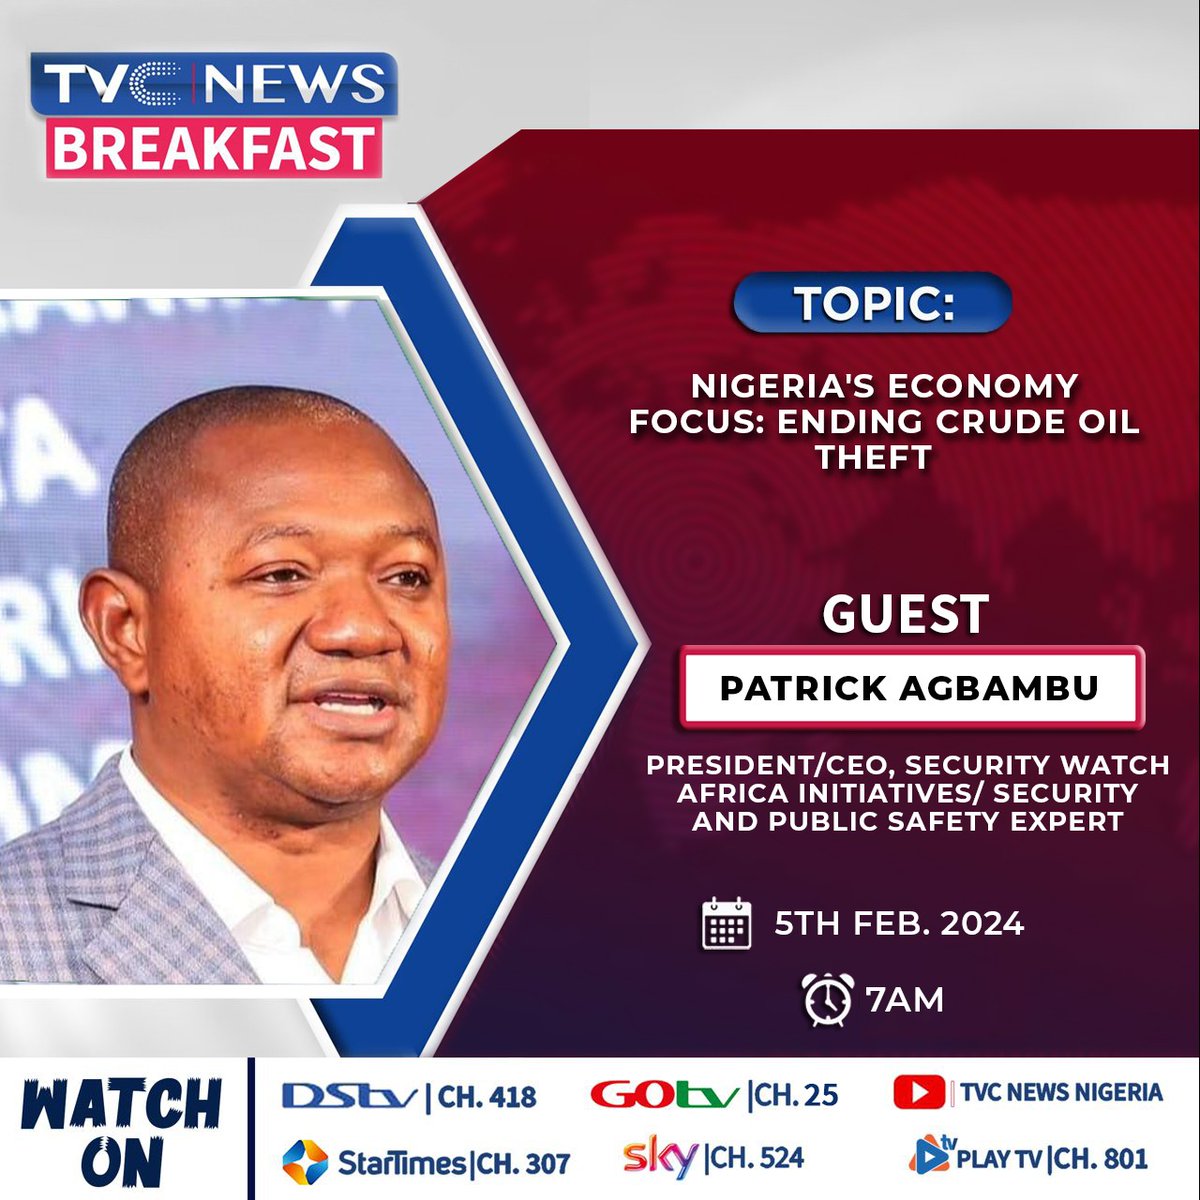 Why Is Nigeria's Oil Being Stolen? Join Us To Find Out. @NigeriaGov @NigerianNavy @NigNavyToday @nnpclimited @SecurityWatch97 @CVIZIER @skusman